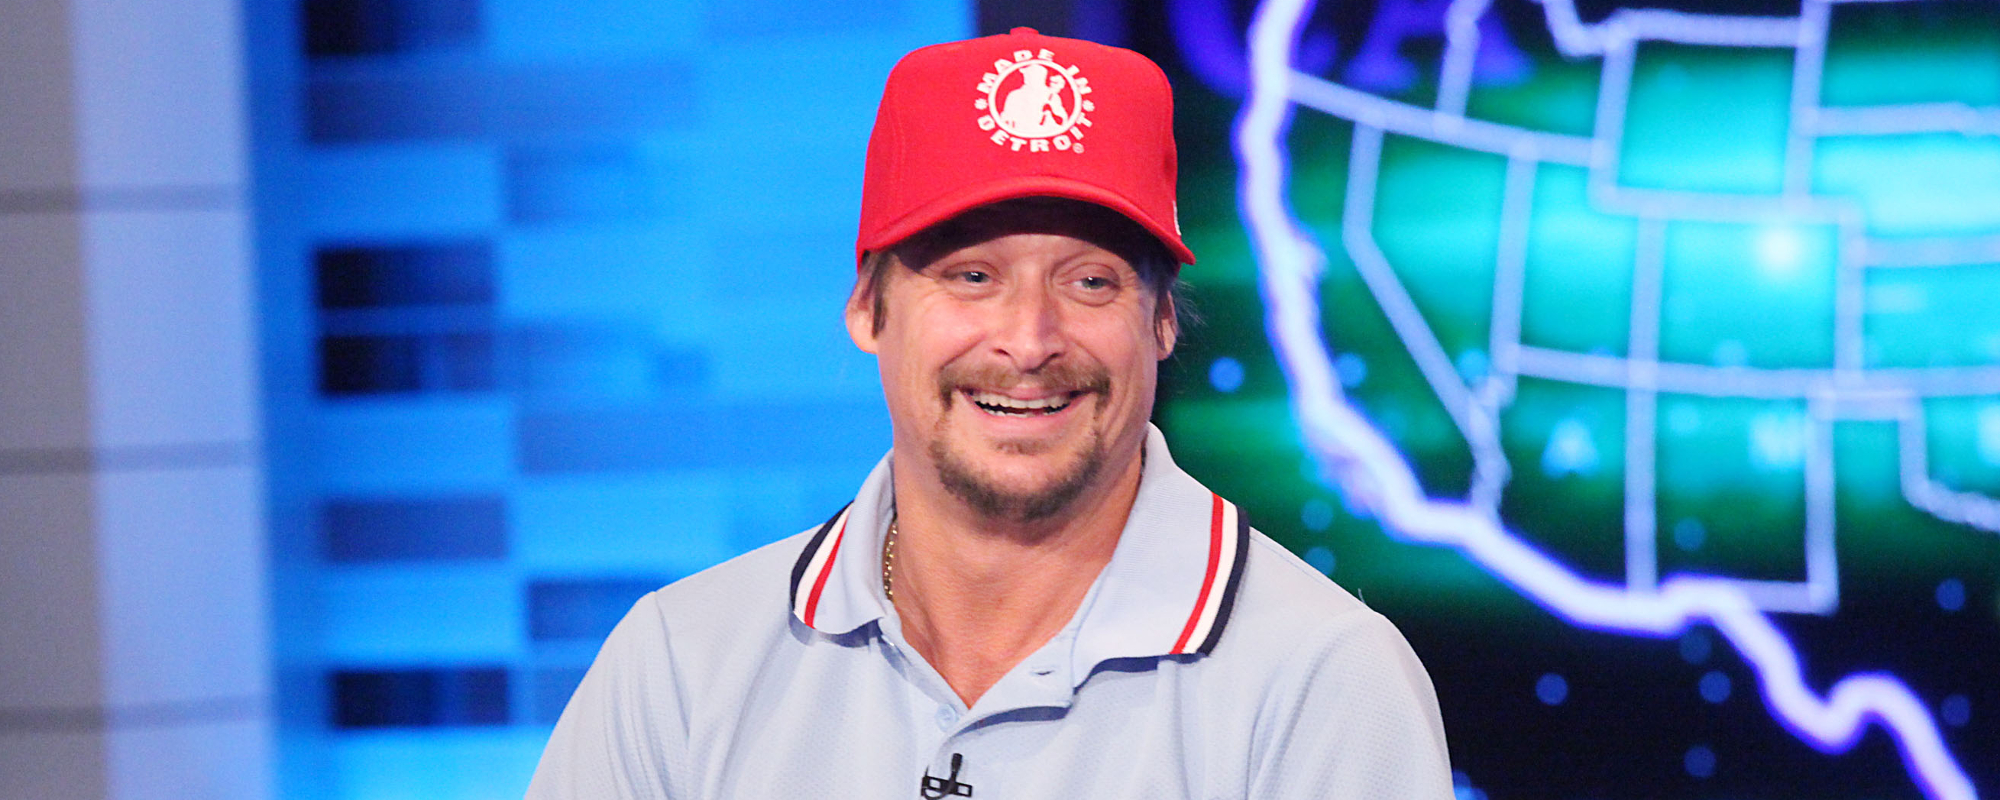 Kid Rock is Back to Drinking Bud Light After Boycott: “Nothing Wrong With Giving a Spanking”